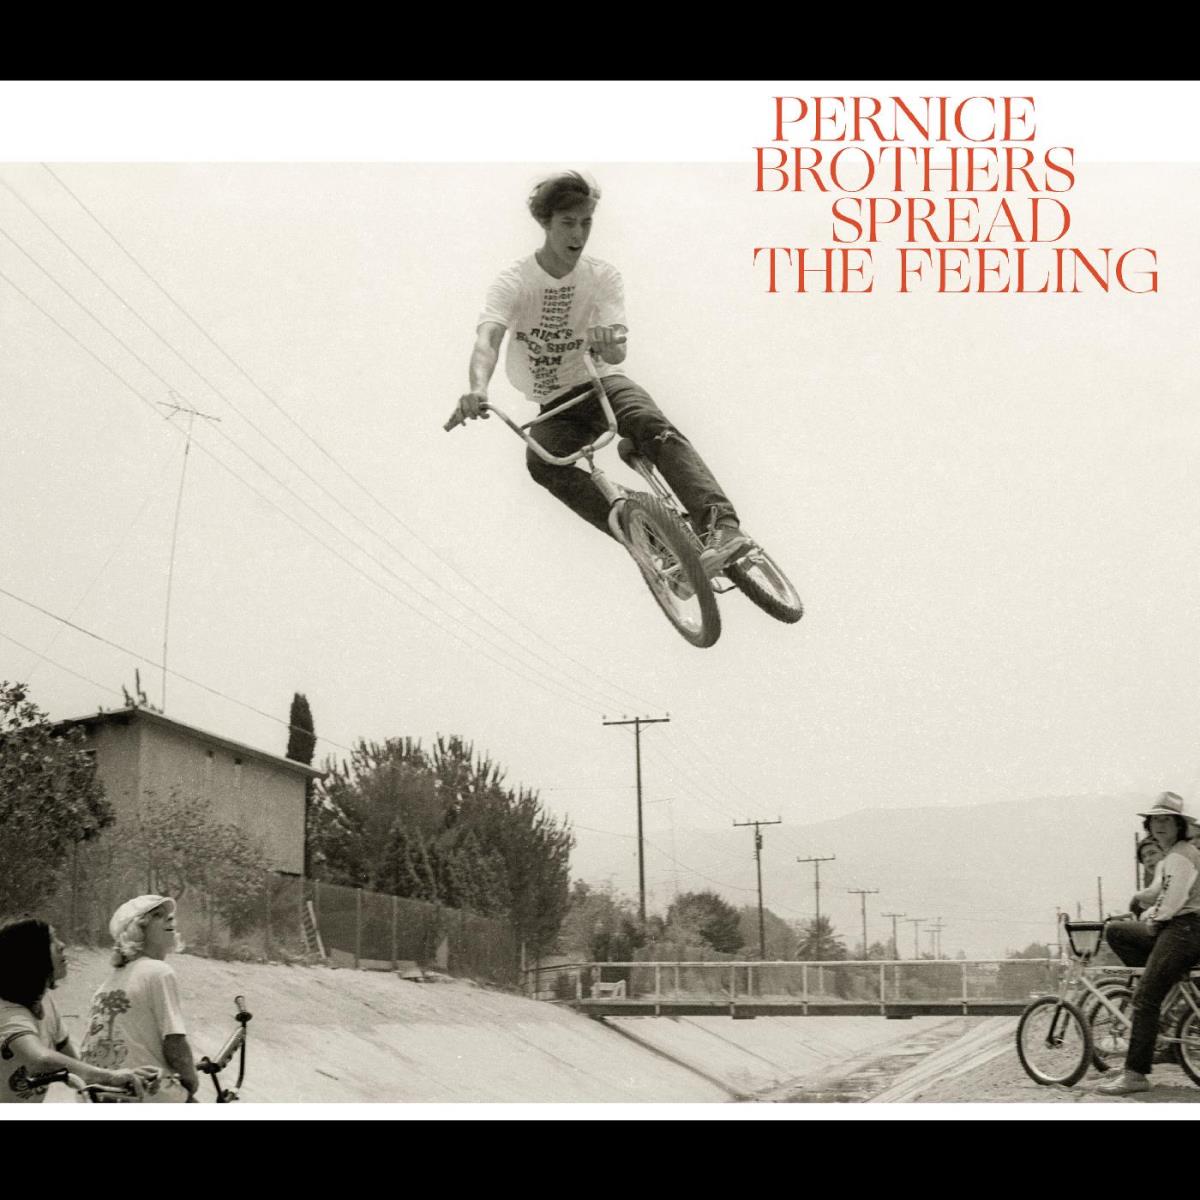 Pernice Brothers: Spread the feeling 2019